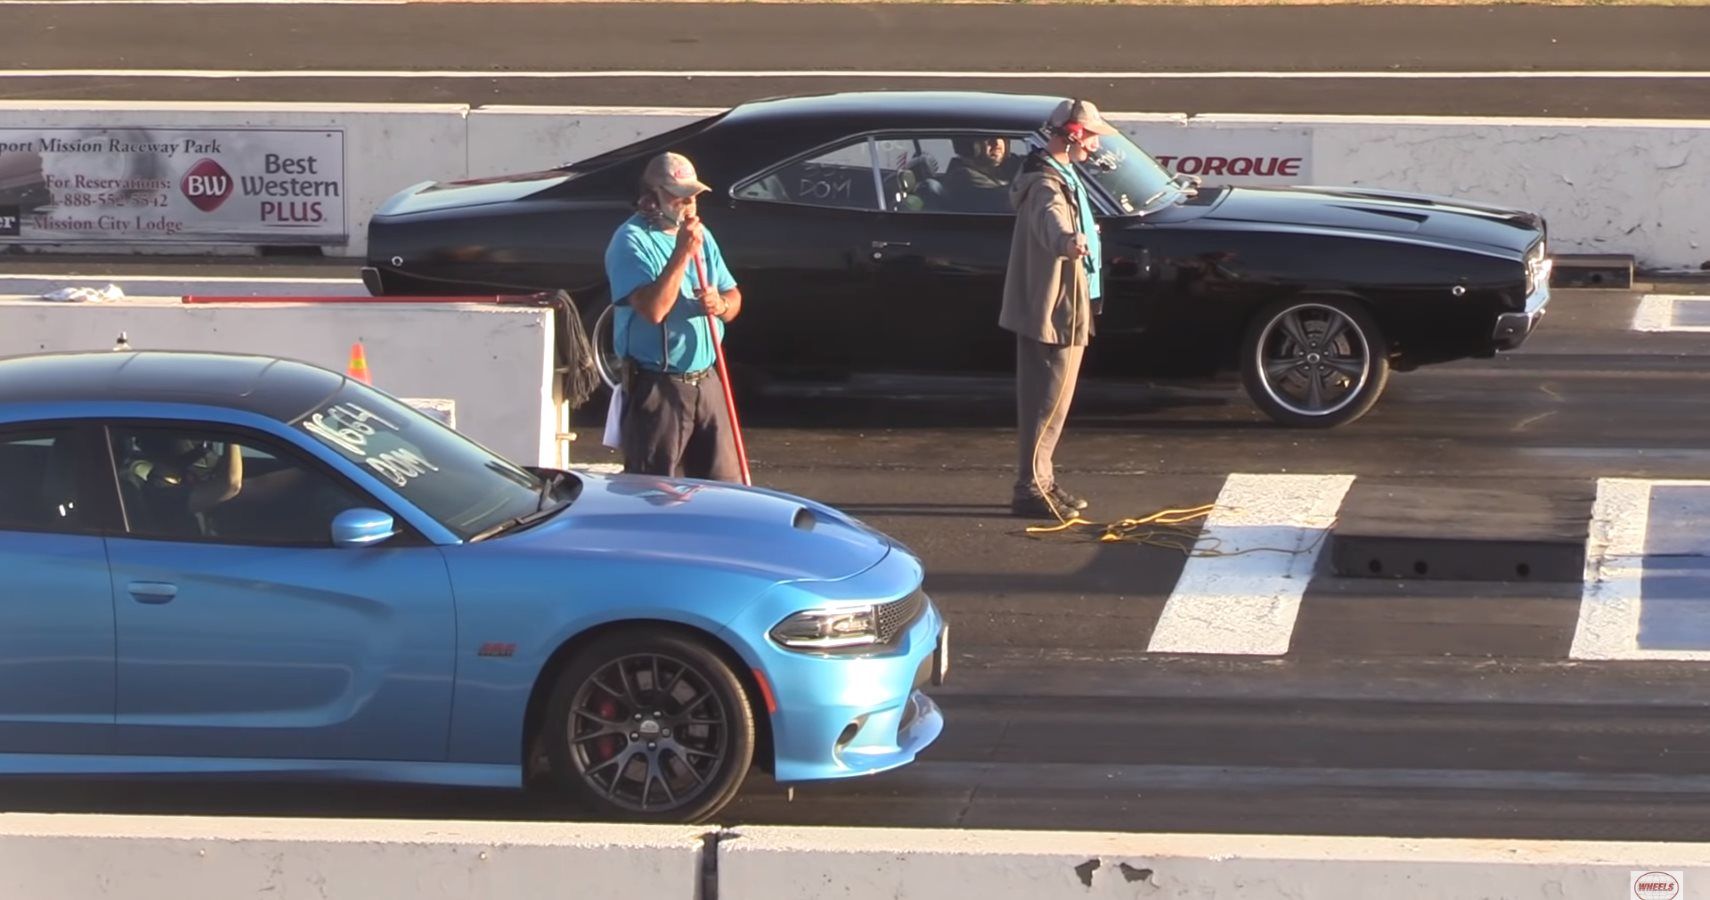 Watch A 1968 Charger Take On A 2018 Charger In Drag Race Actionument